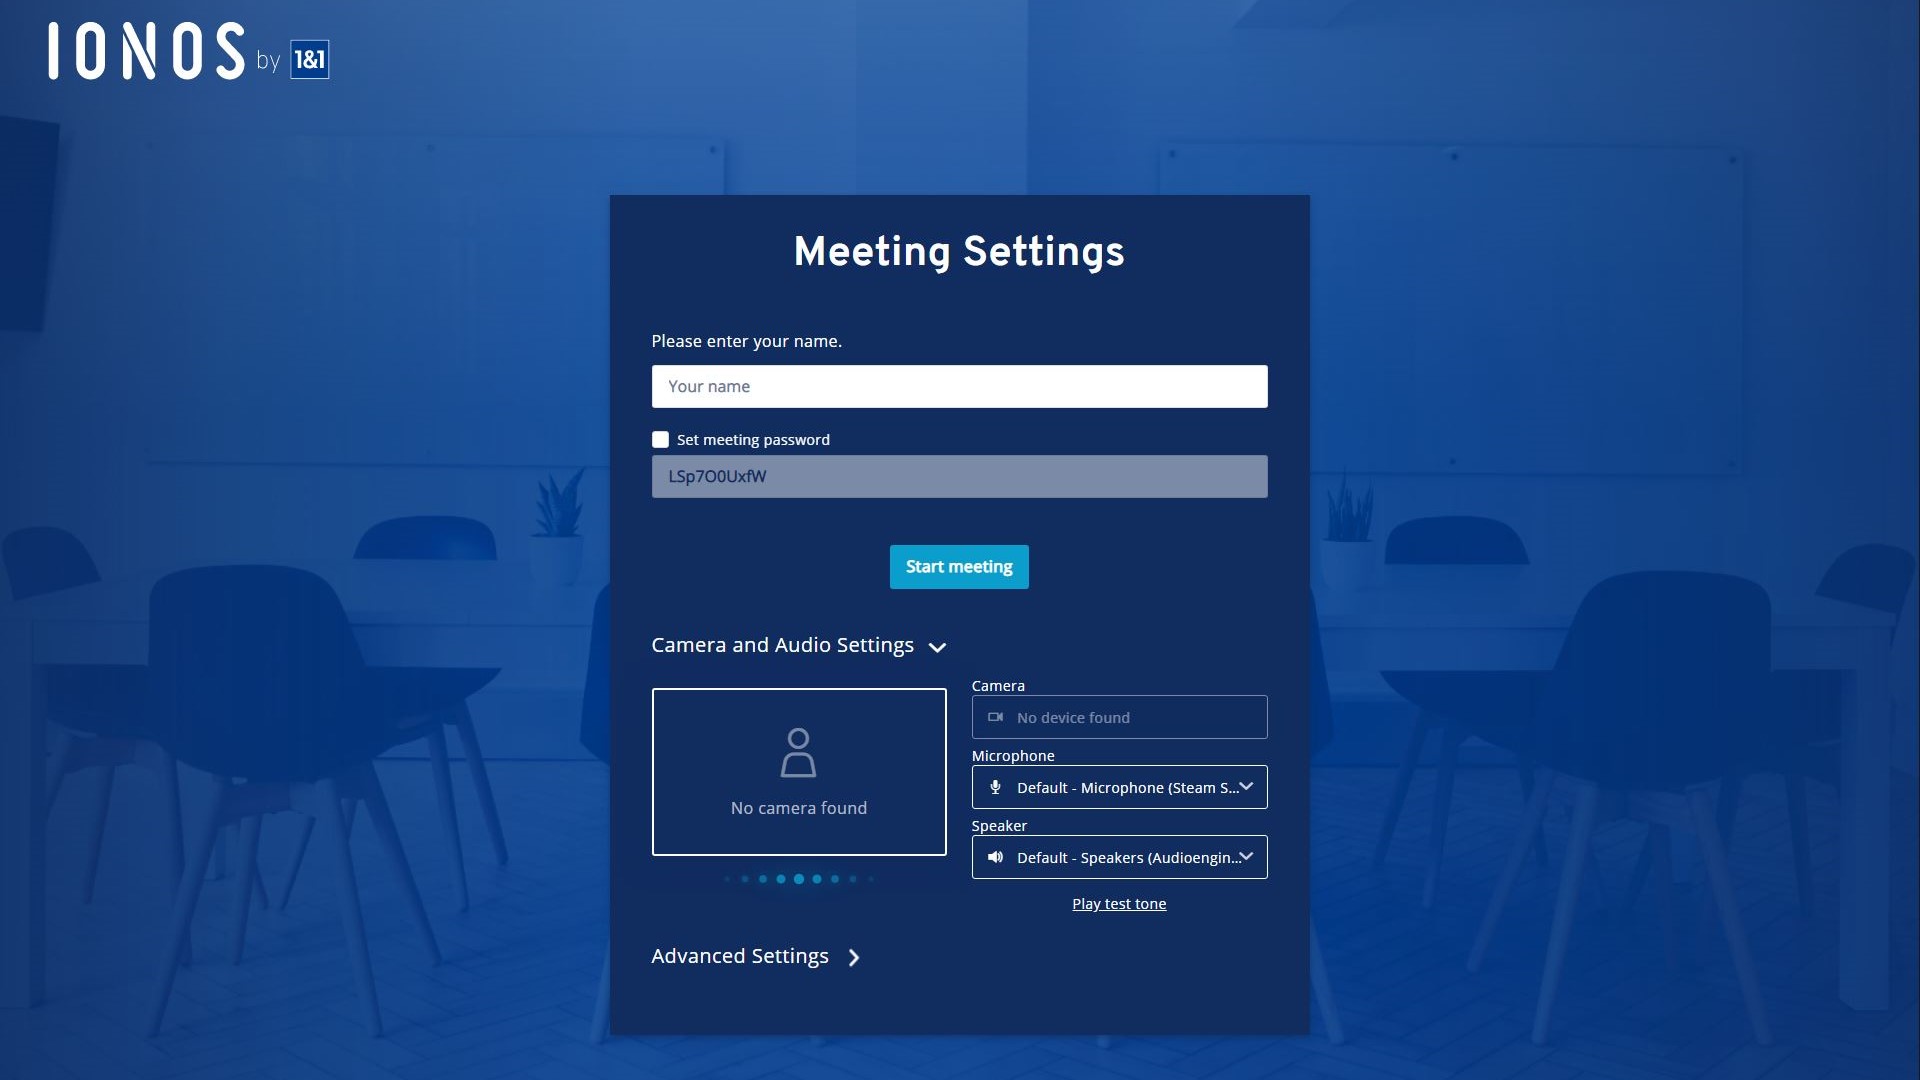 Ionos launches free video conferencing tool TechRadar